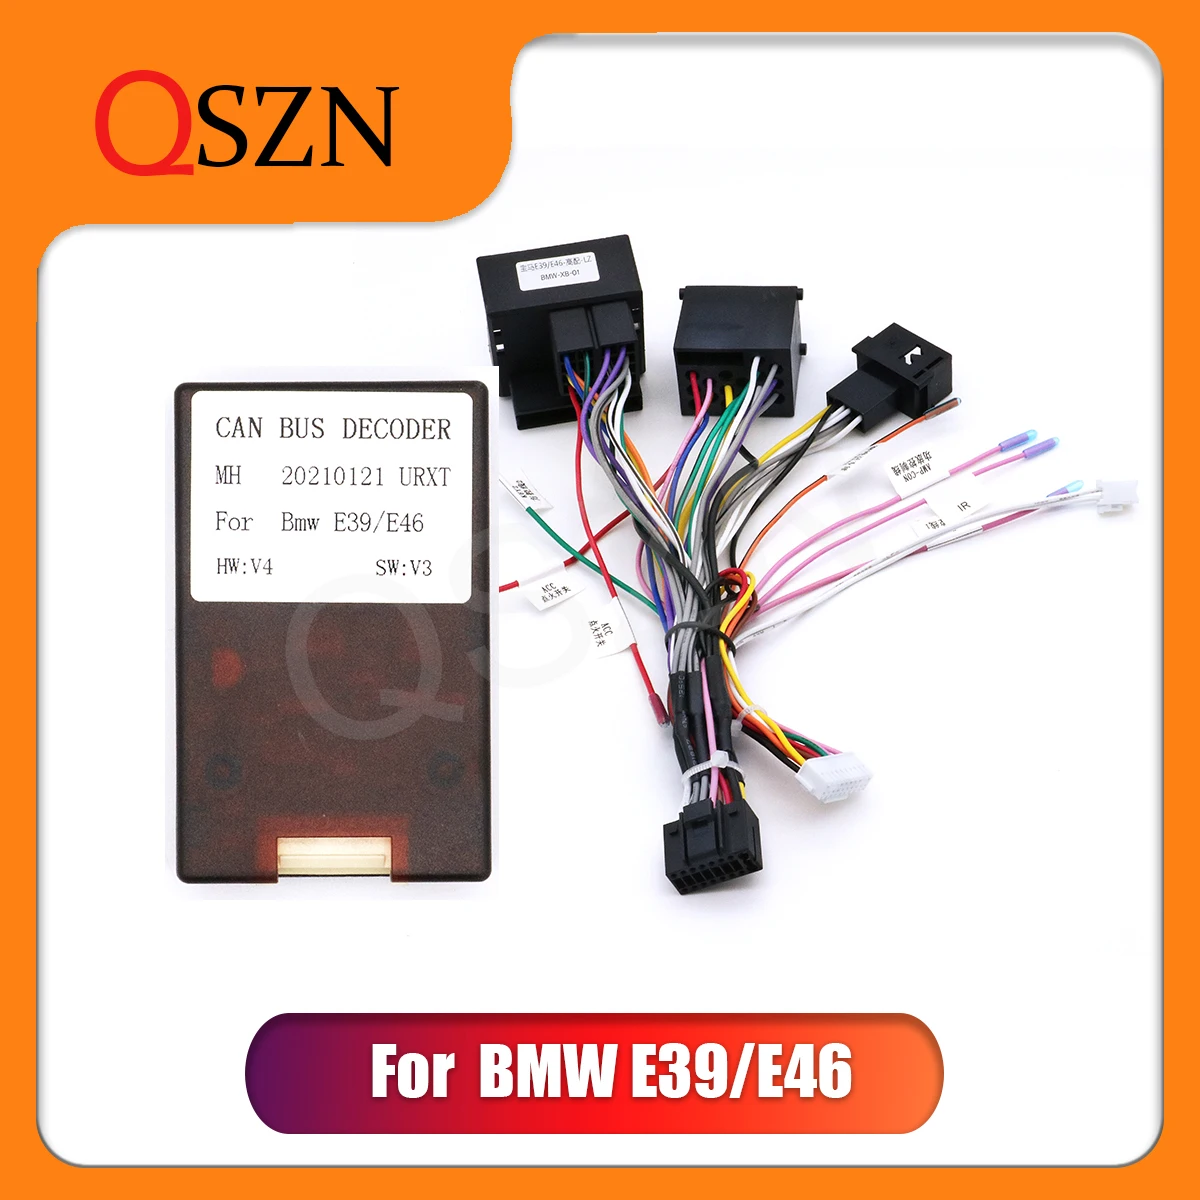 Купи QSZN Car radio Canbus Box Decoder For BMW E39 E46 Harness Wiring Cables 16PIN Wiring Harness Plug Power Cable Android за 357 рублей в магазине AliExpress